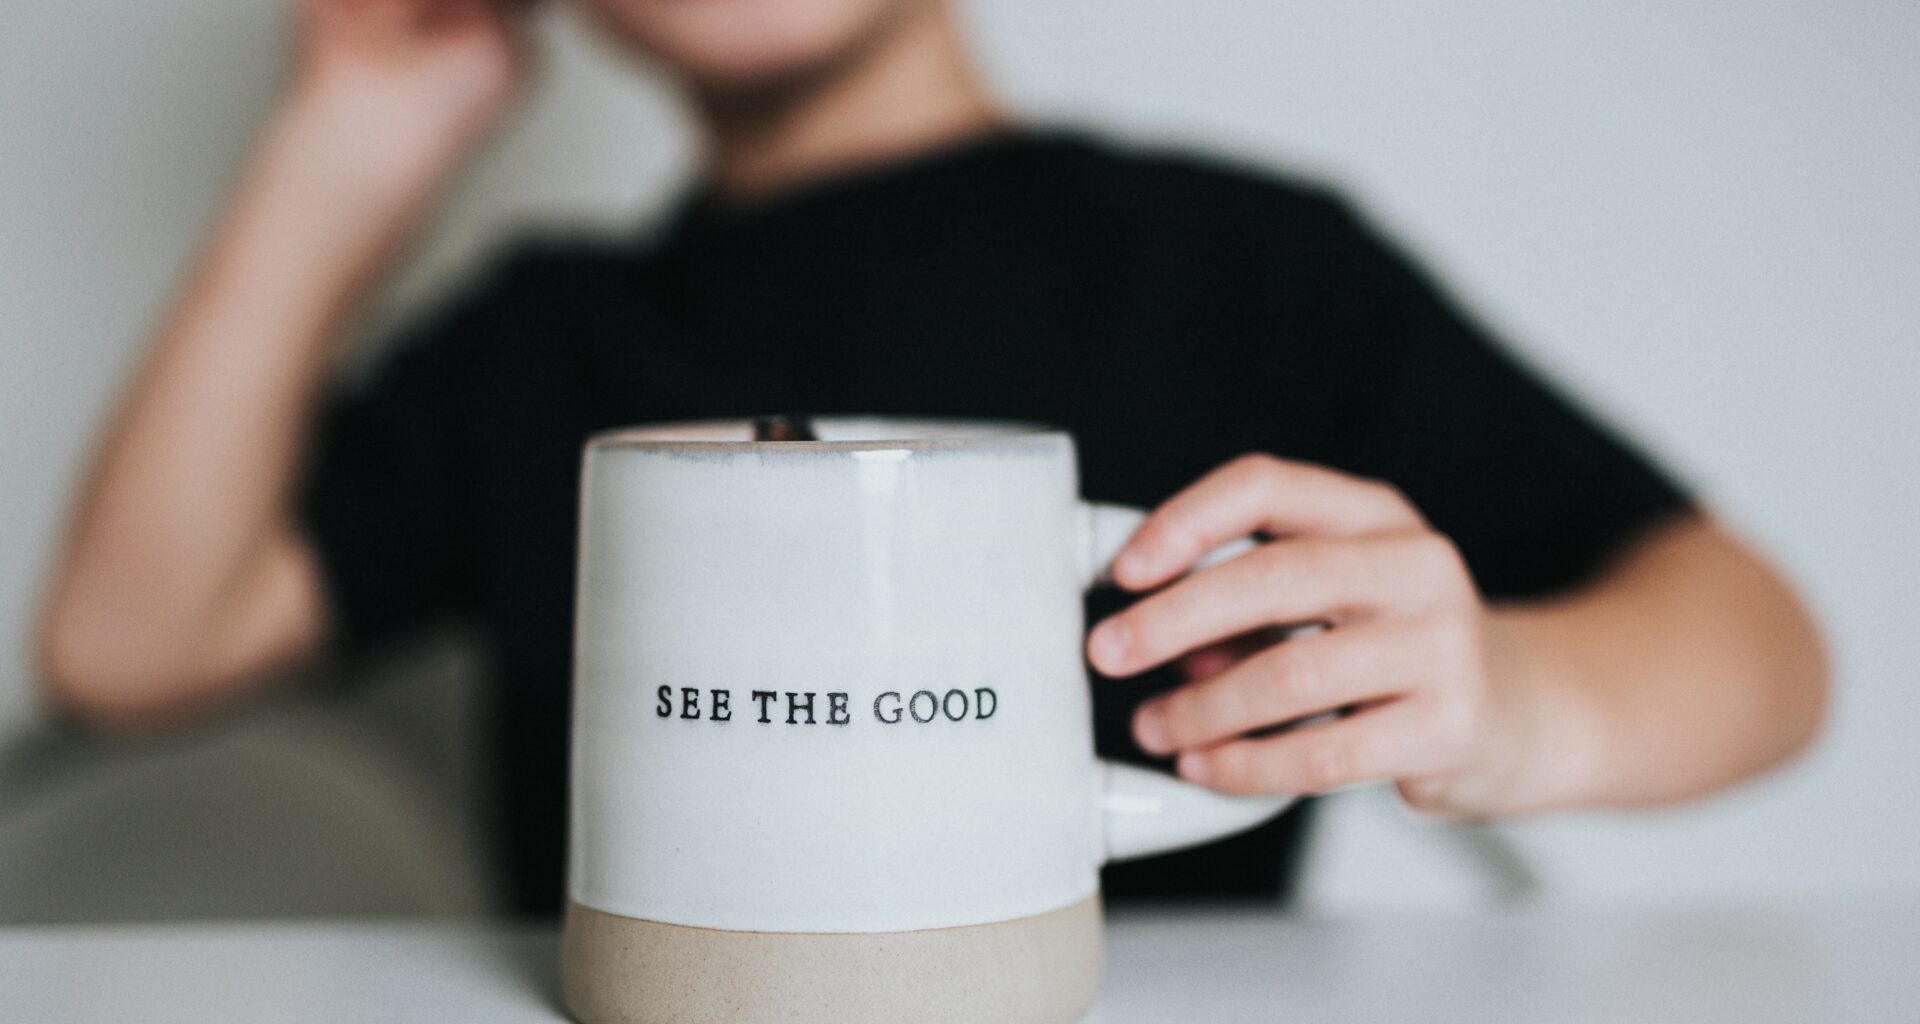 Cropped photo by Nathan Dumlao of a young person sitting at a table, with hand on a mug that has a positivity message "see the good."